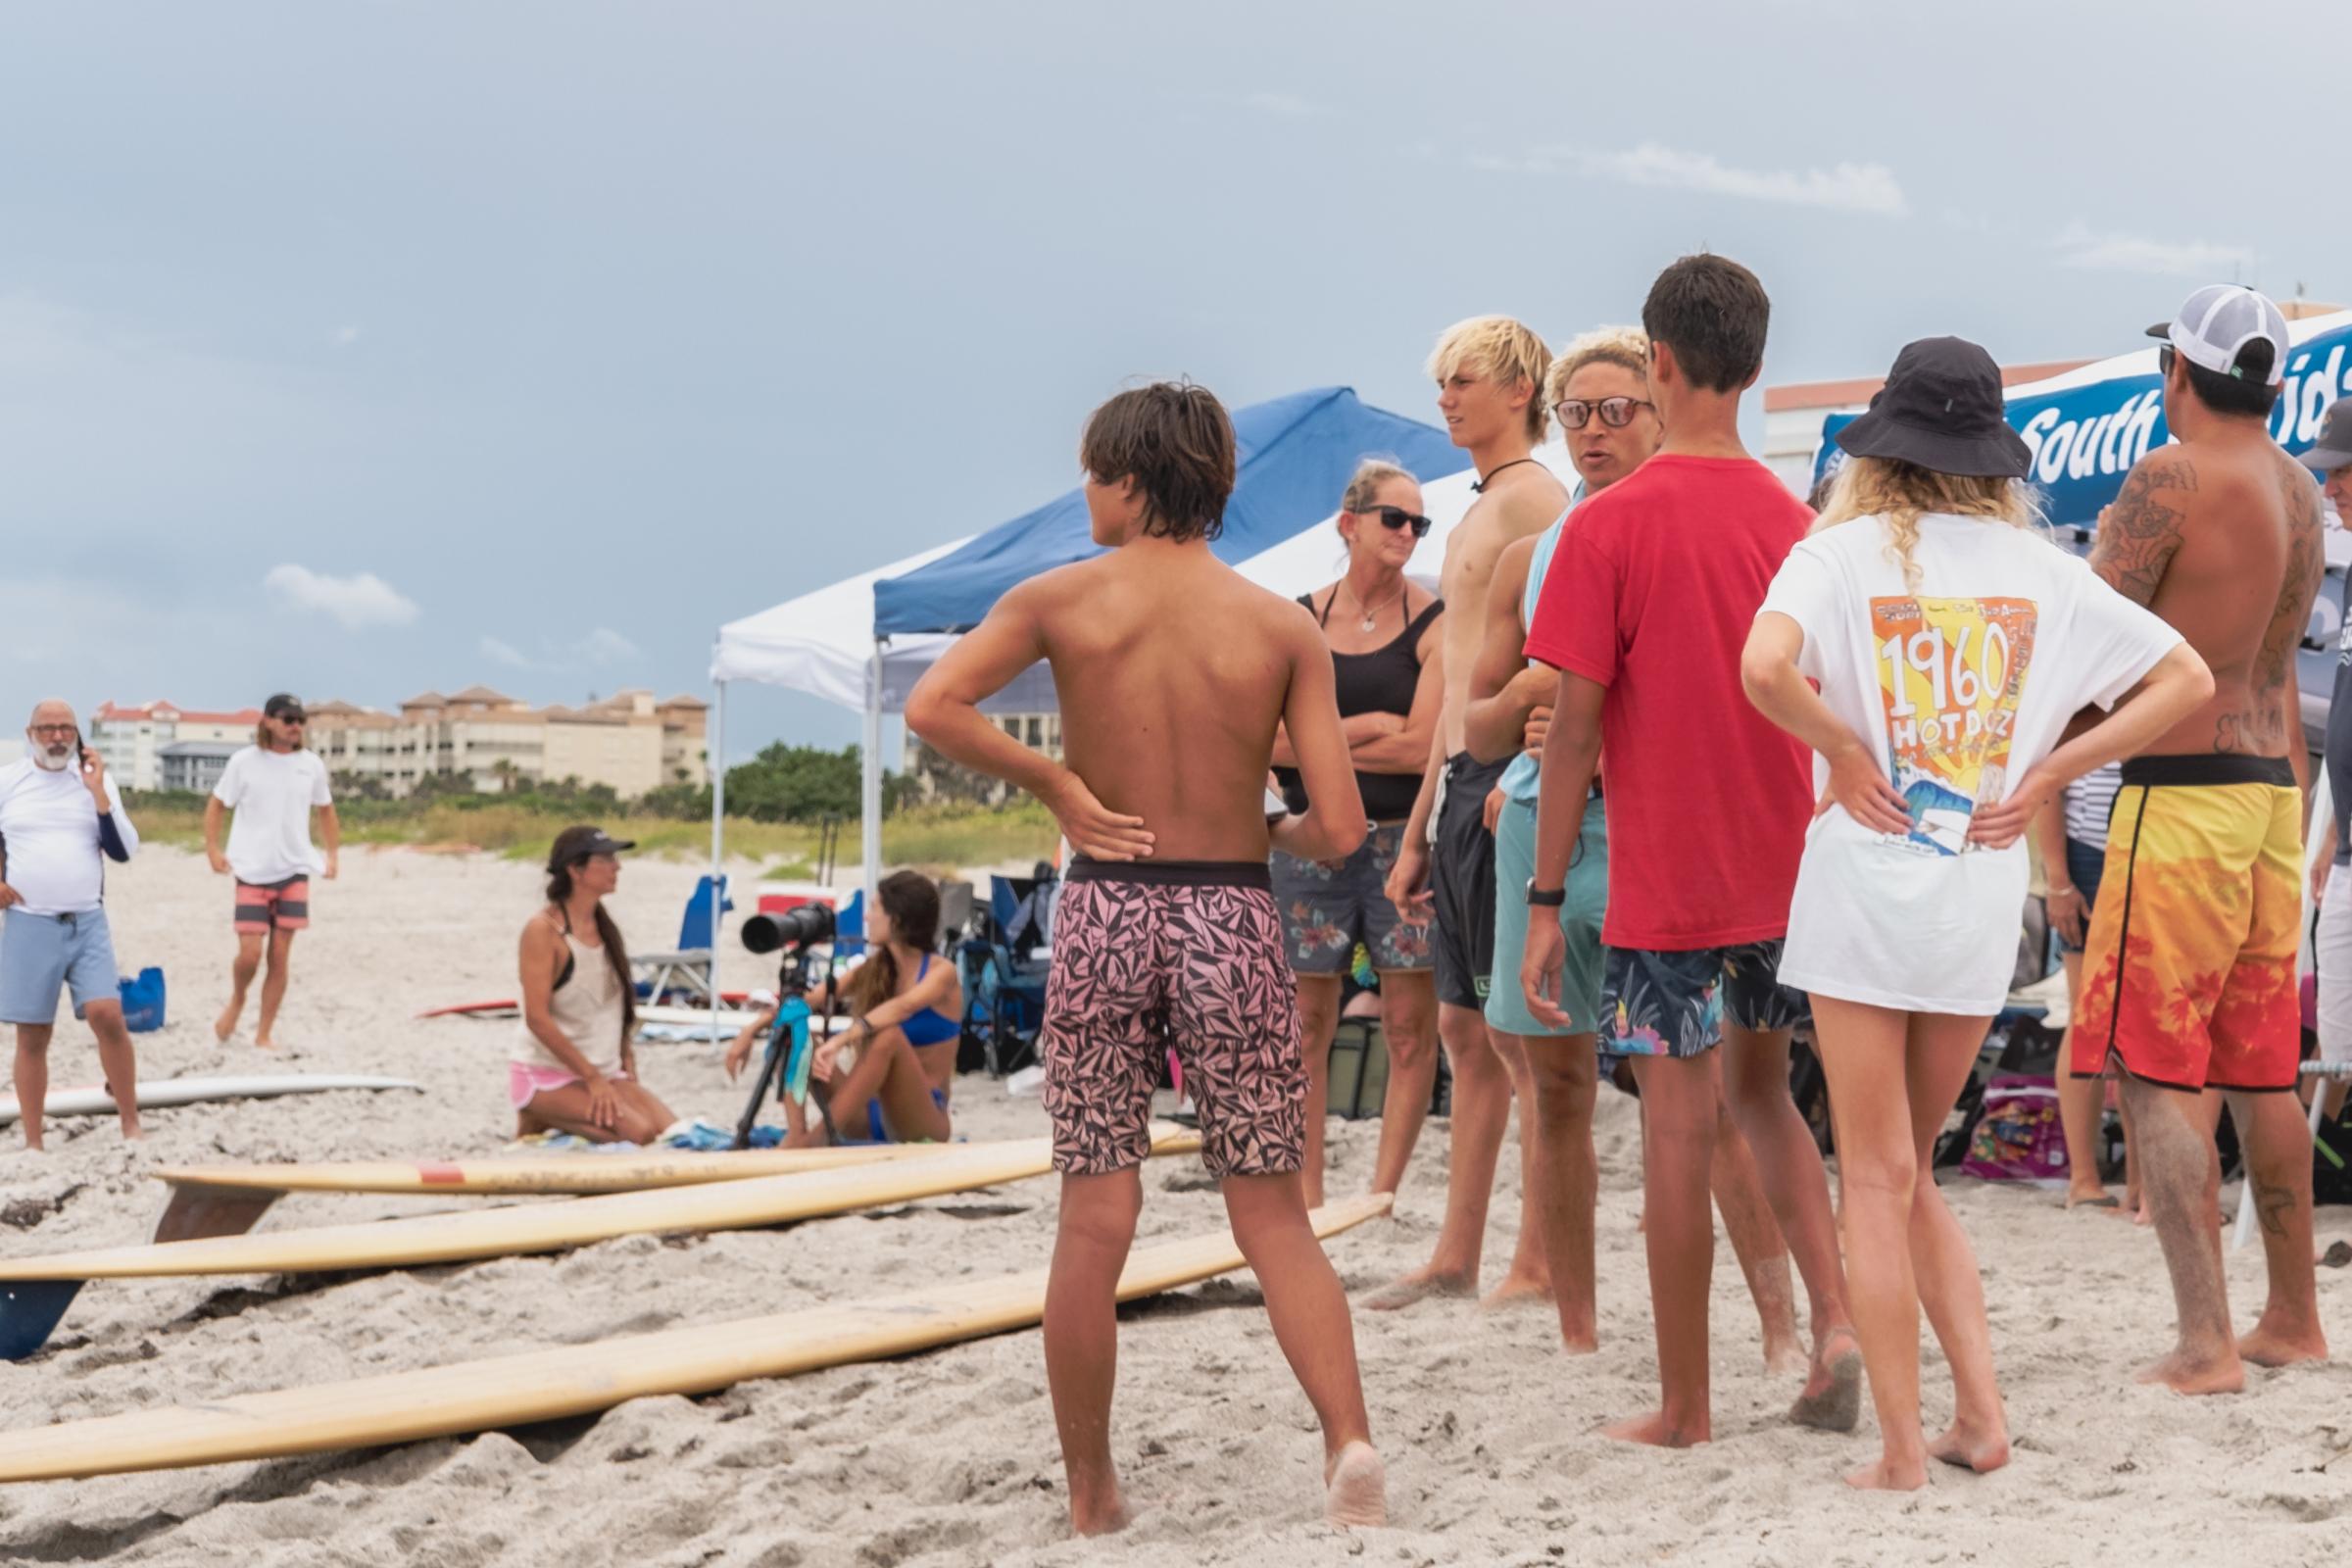 Cape Canaveral, FL. Hotdogzonastix Surf Contest July 2021 -  Overview of contestants and crowd at the Third Annual...